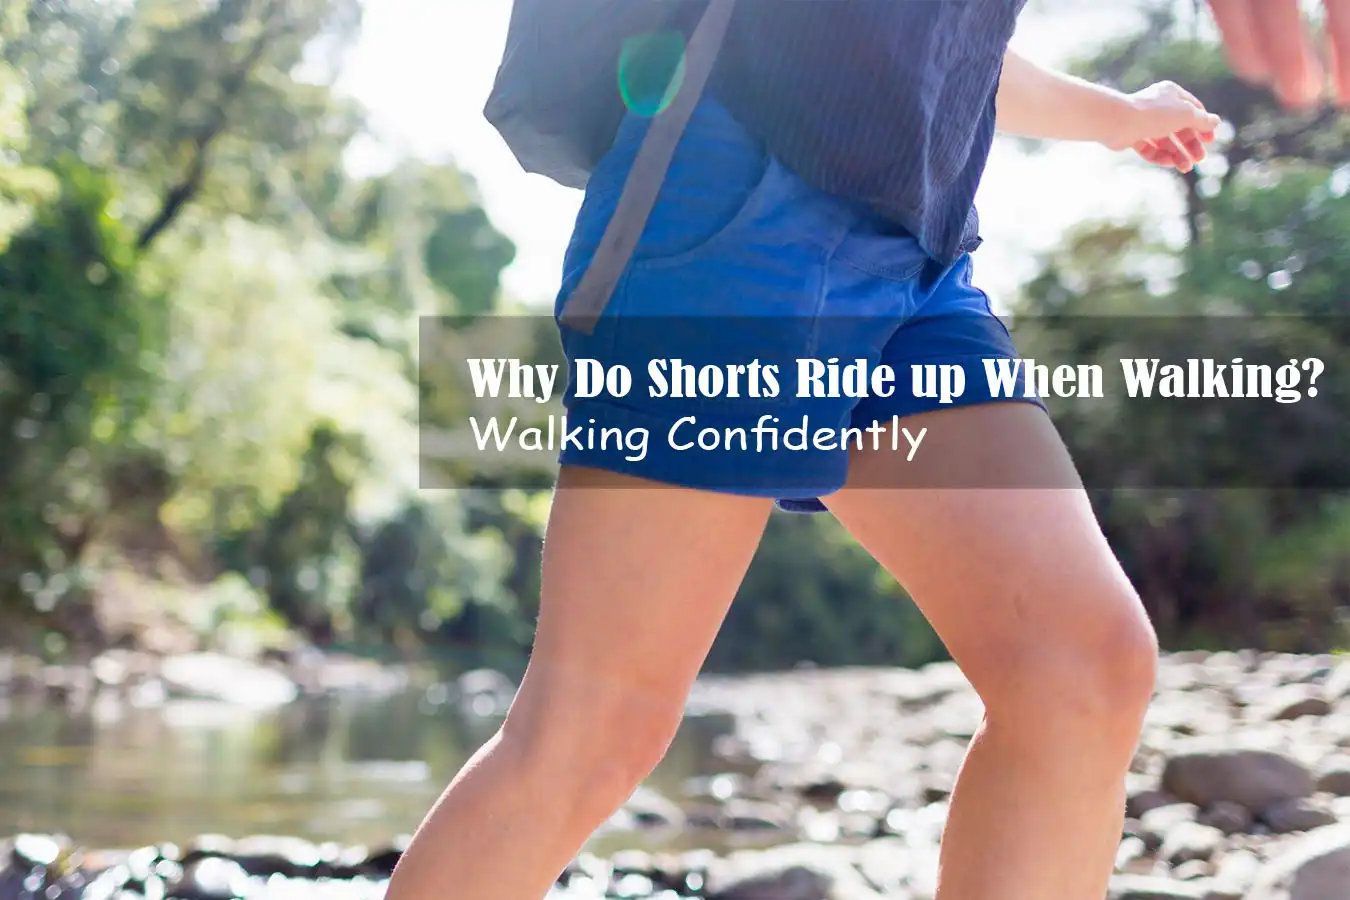 Walking Confidently: Why Do Shorts Ride up When Walking?